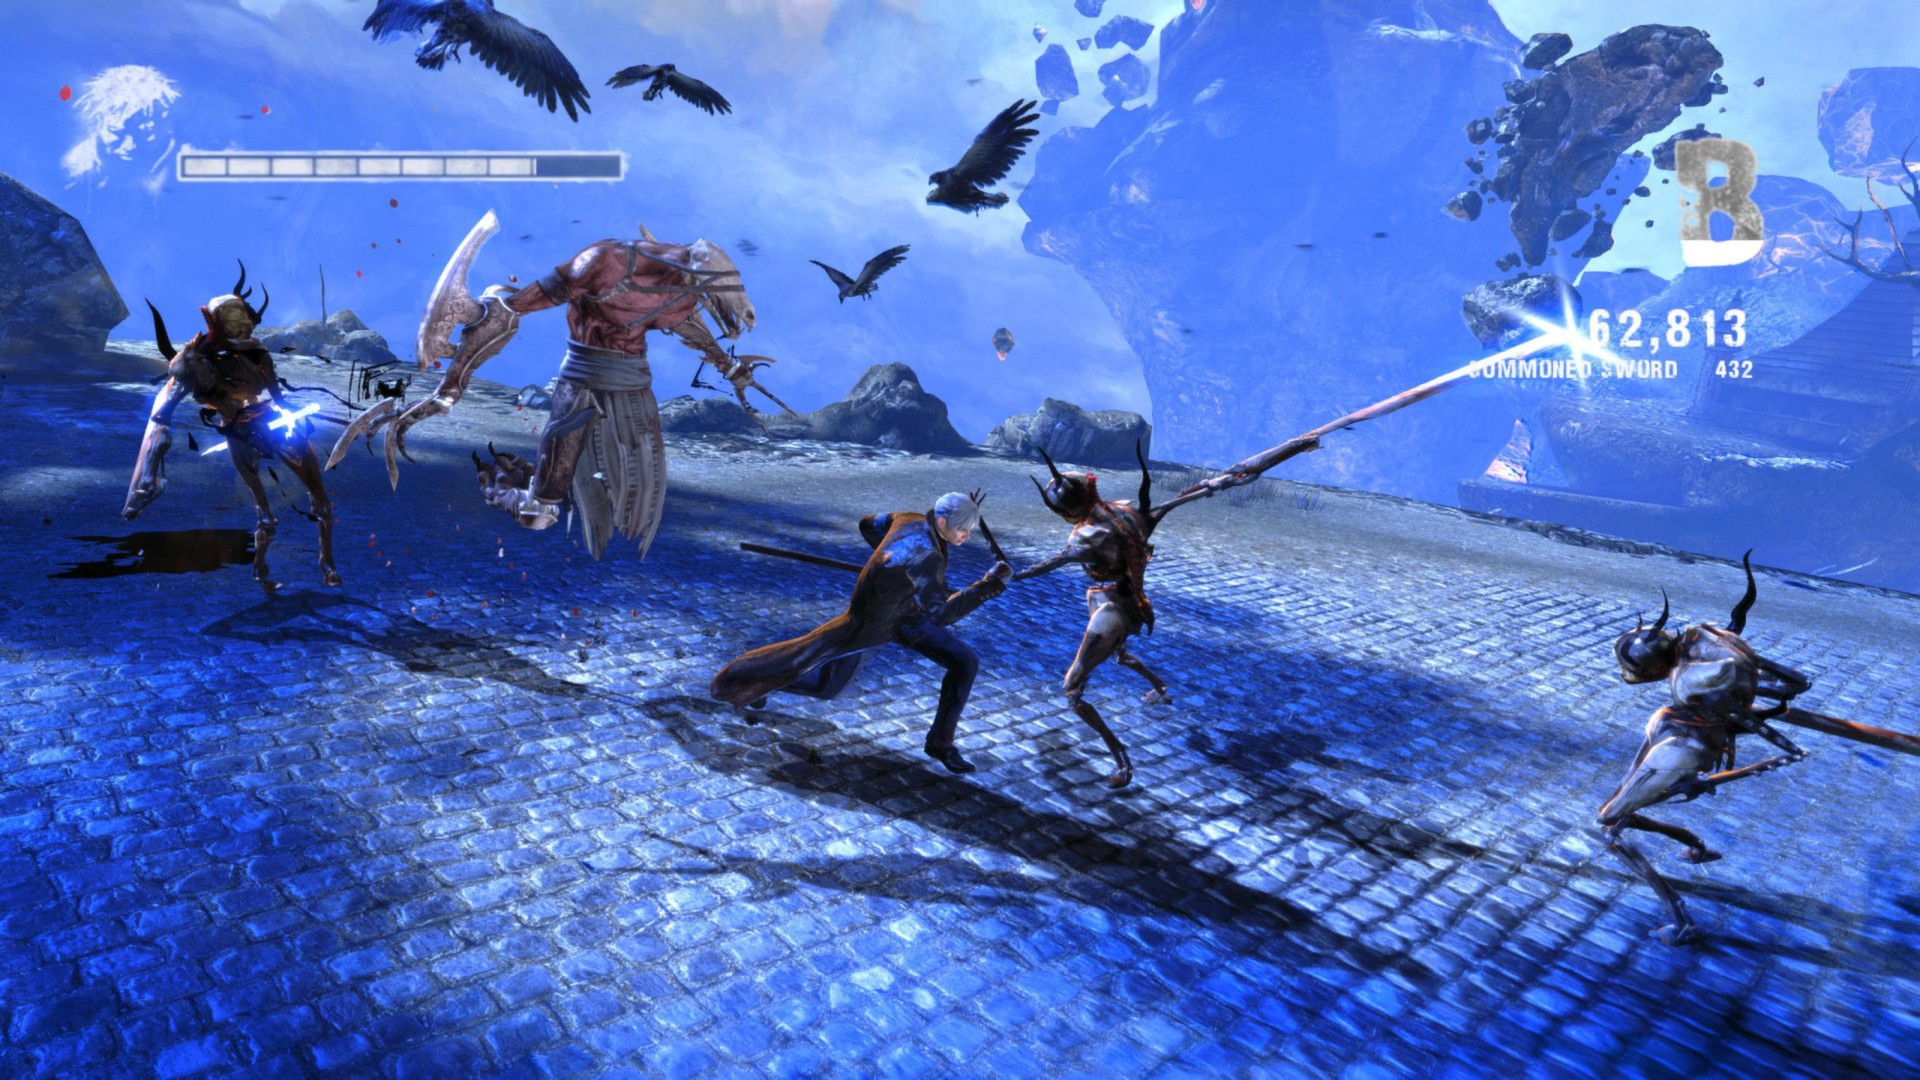 Review: DmC: Devil May Cry Vergil's Downfall DLC